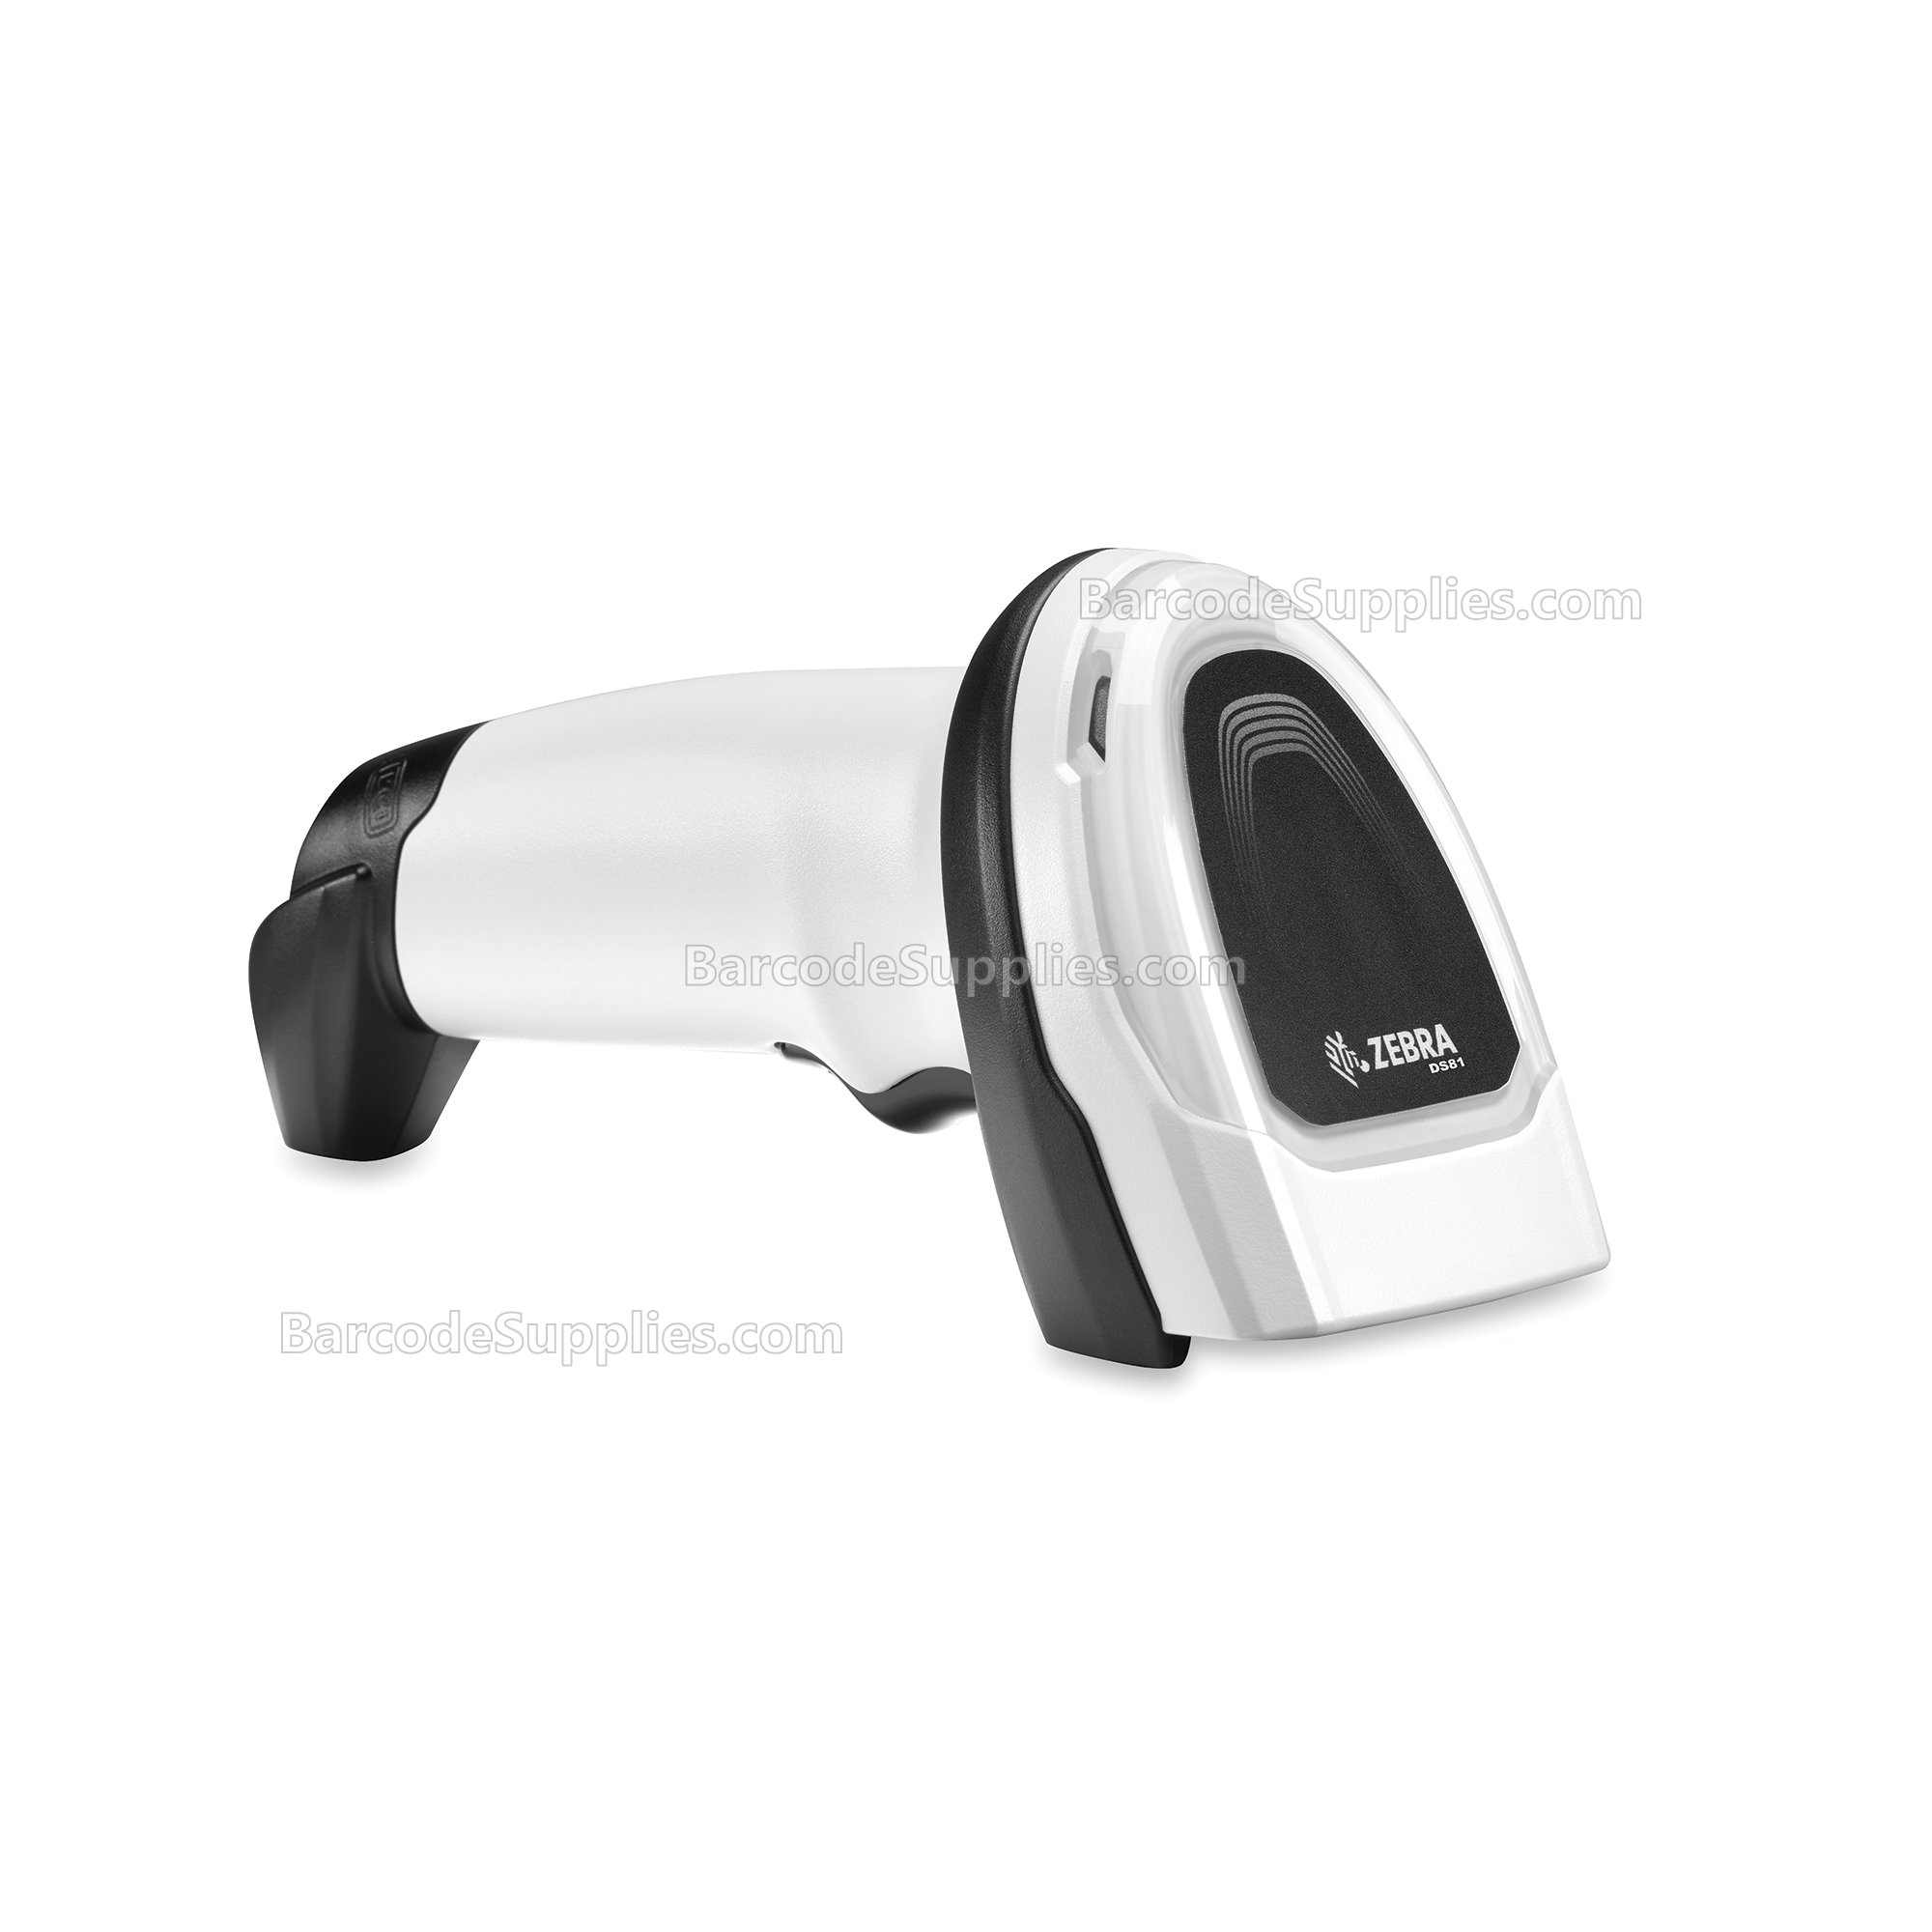 DS8108-DL White (with Stand) USB KIT: DS8108-DL00006ZZWW Scanner, CBA-U21-S07ZBR Shielded USB Cable, 20-71043-04R Stand